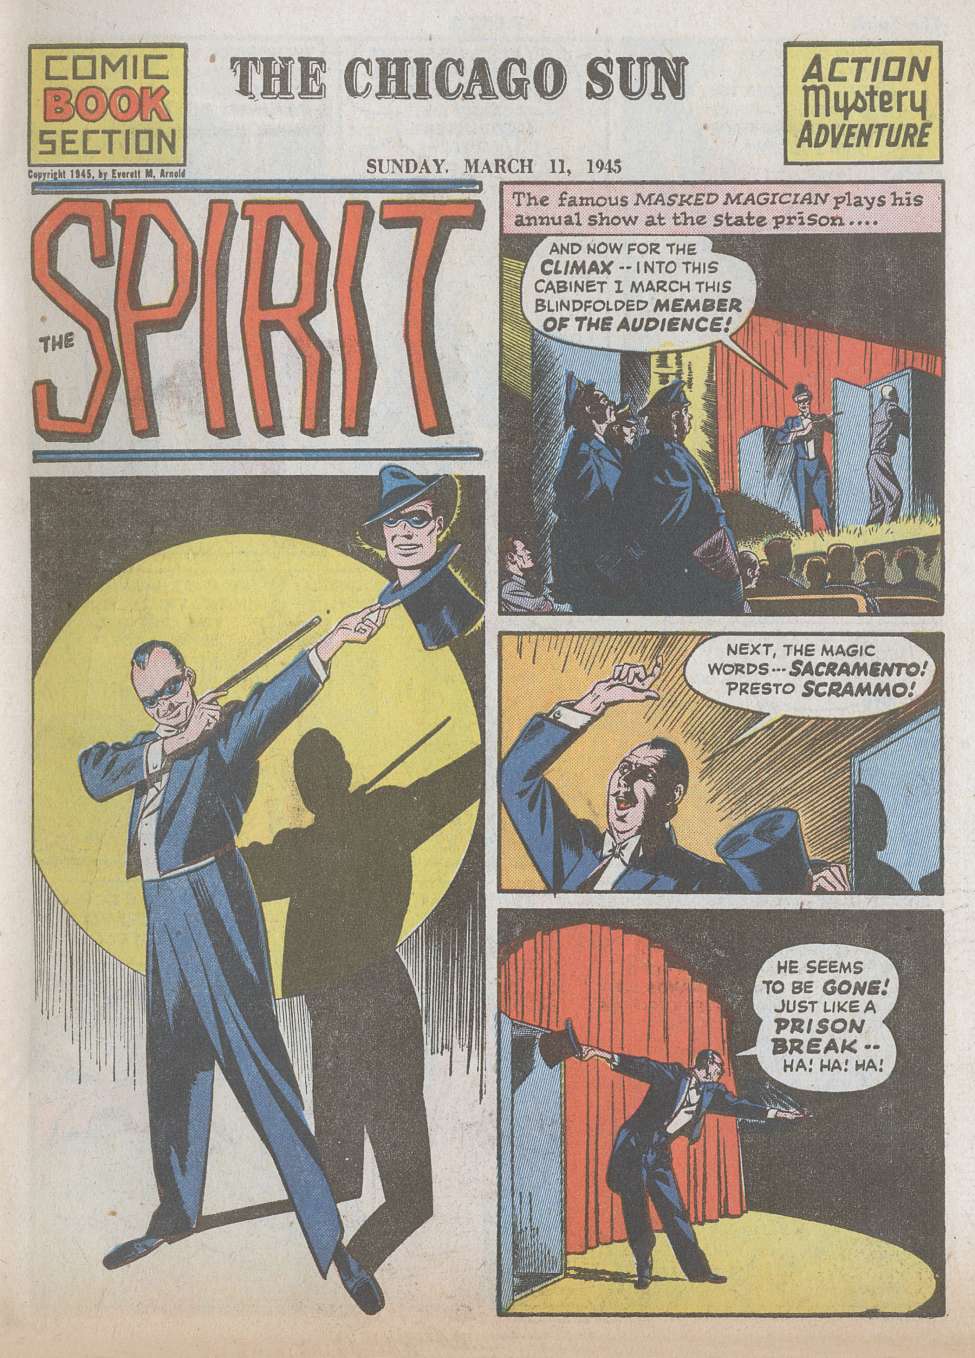 Book Cover For The Spirit (1945-03-11) - Chicago Sun